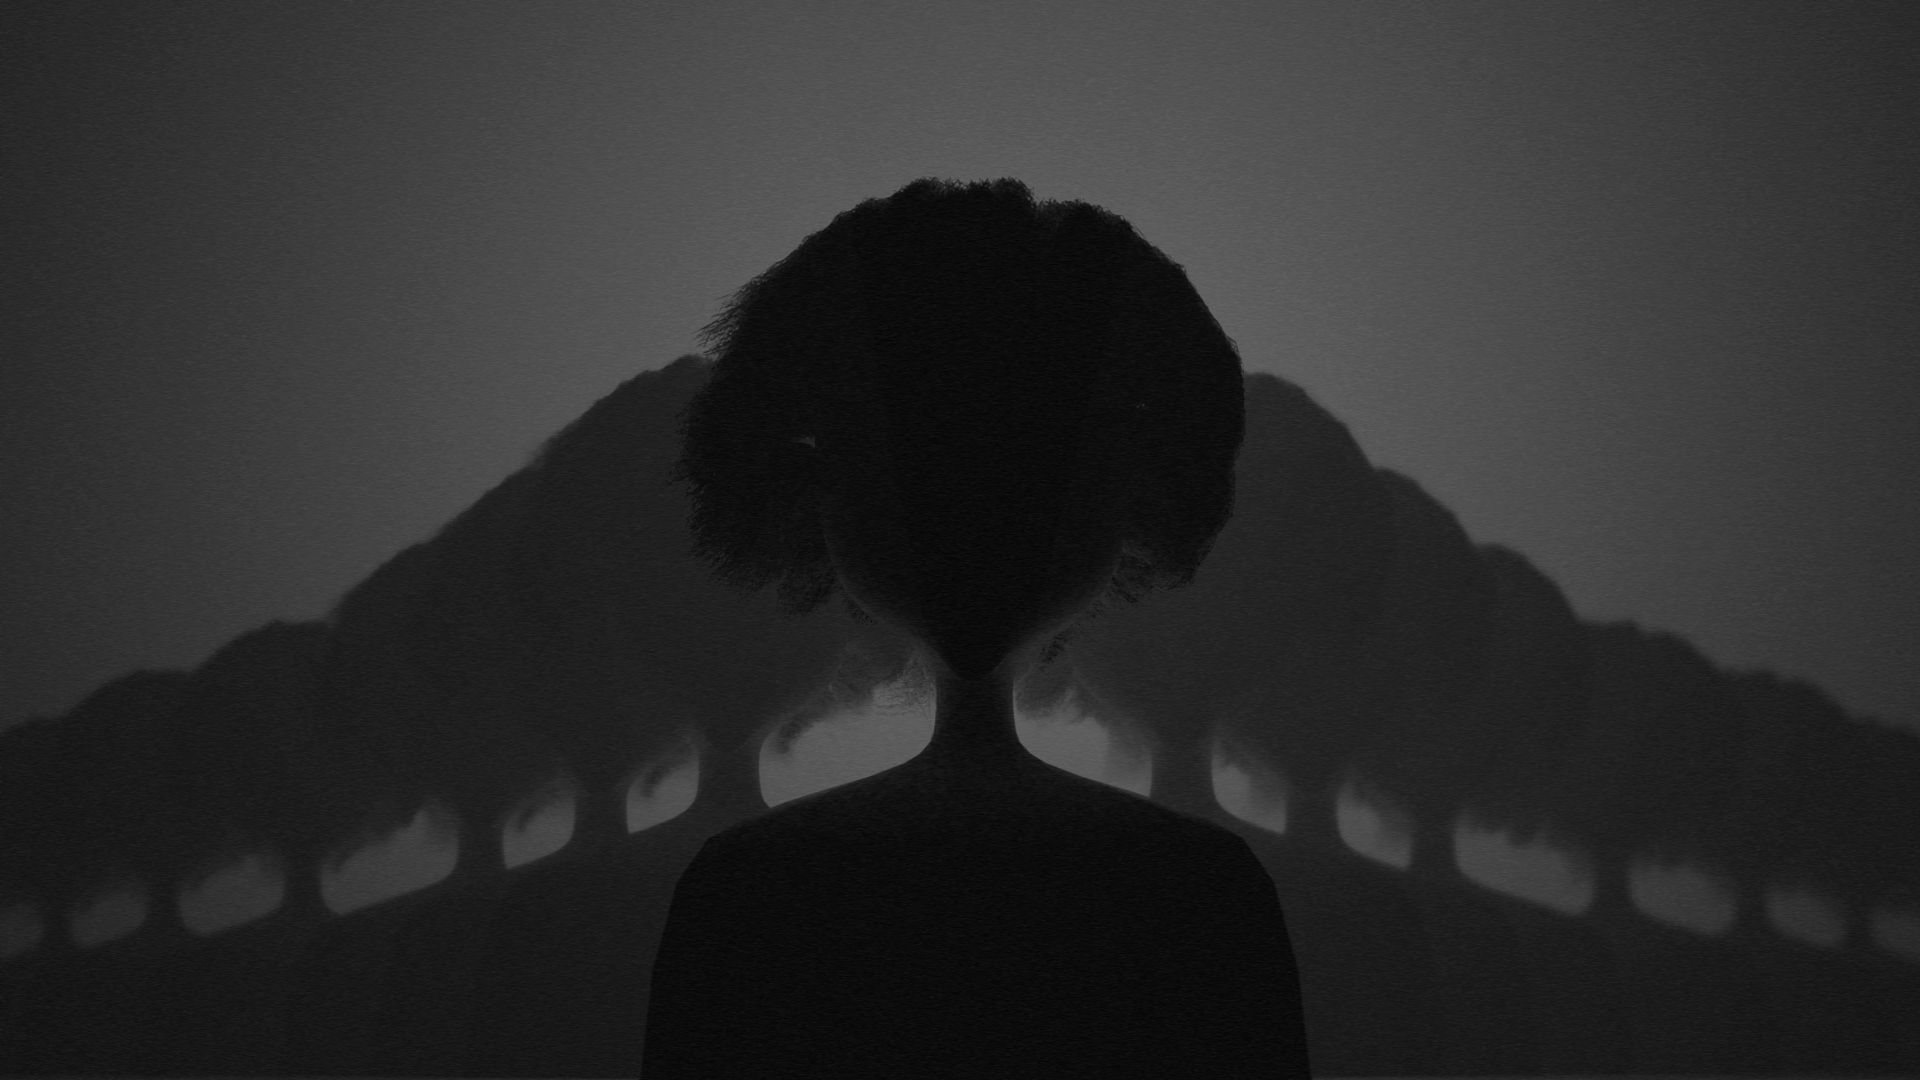 Silhoutte of a figure with copies extending into the distance either side